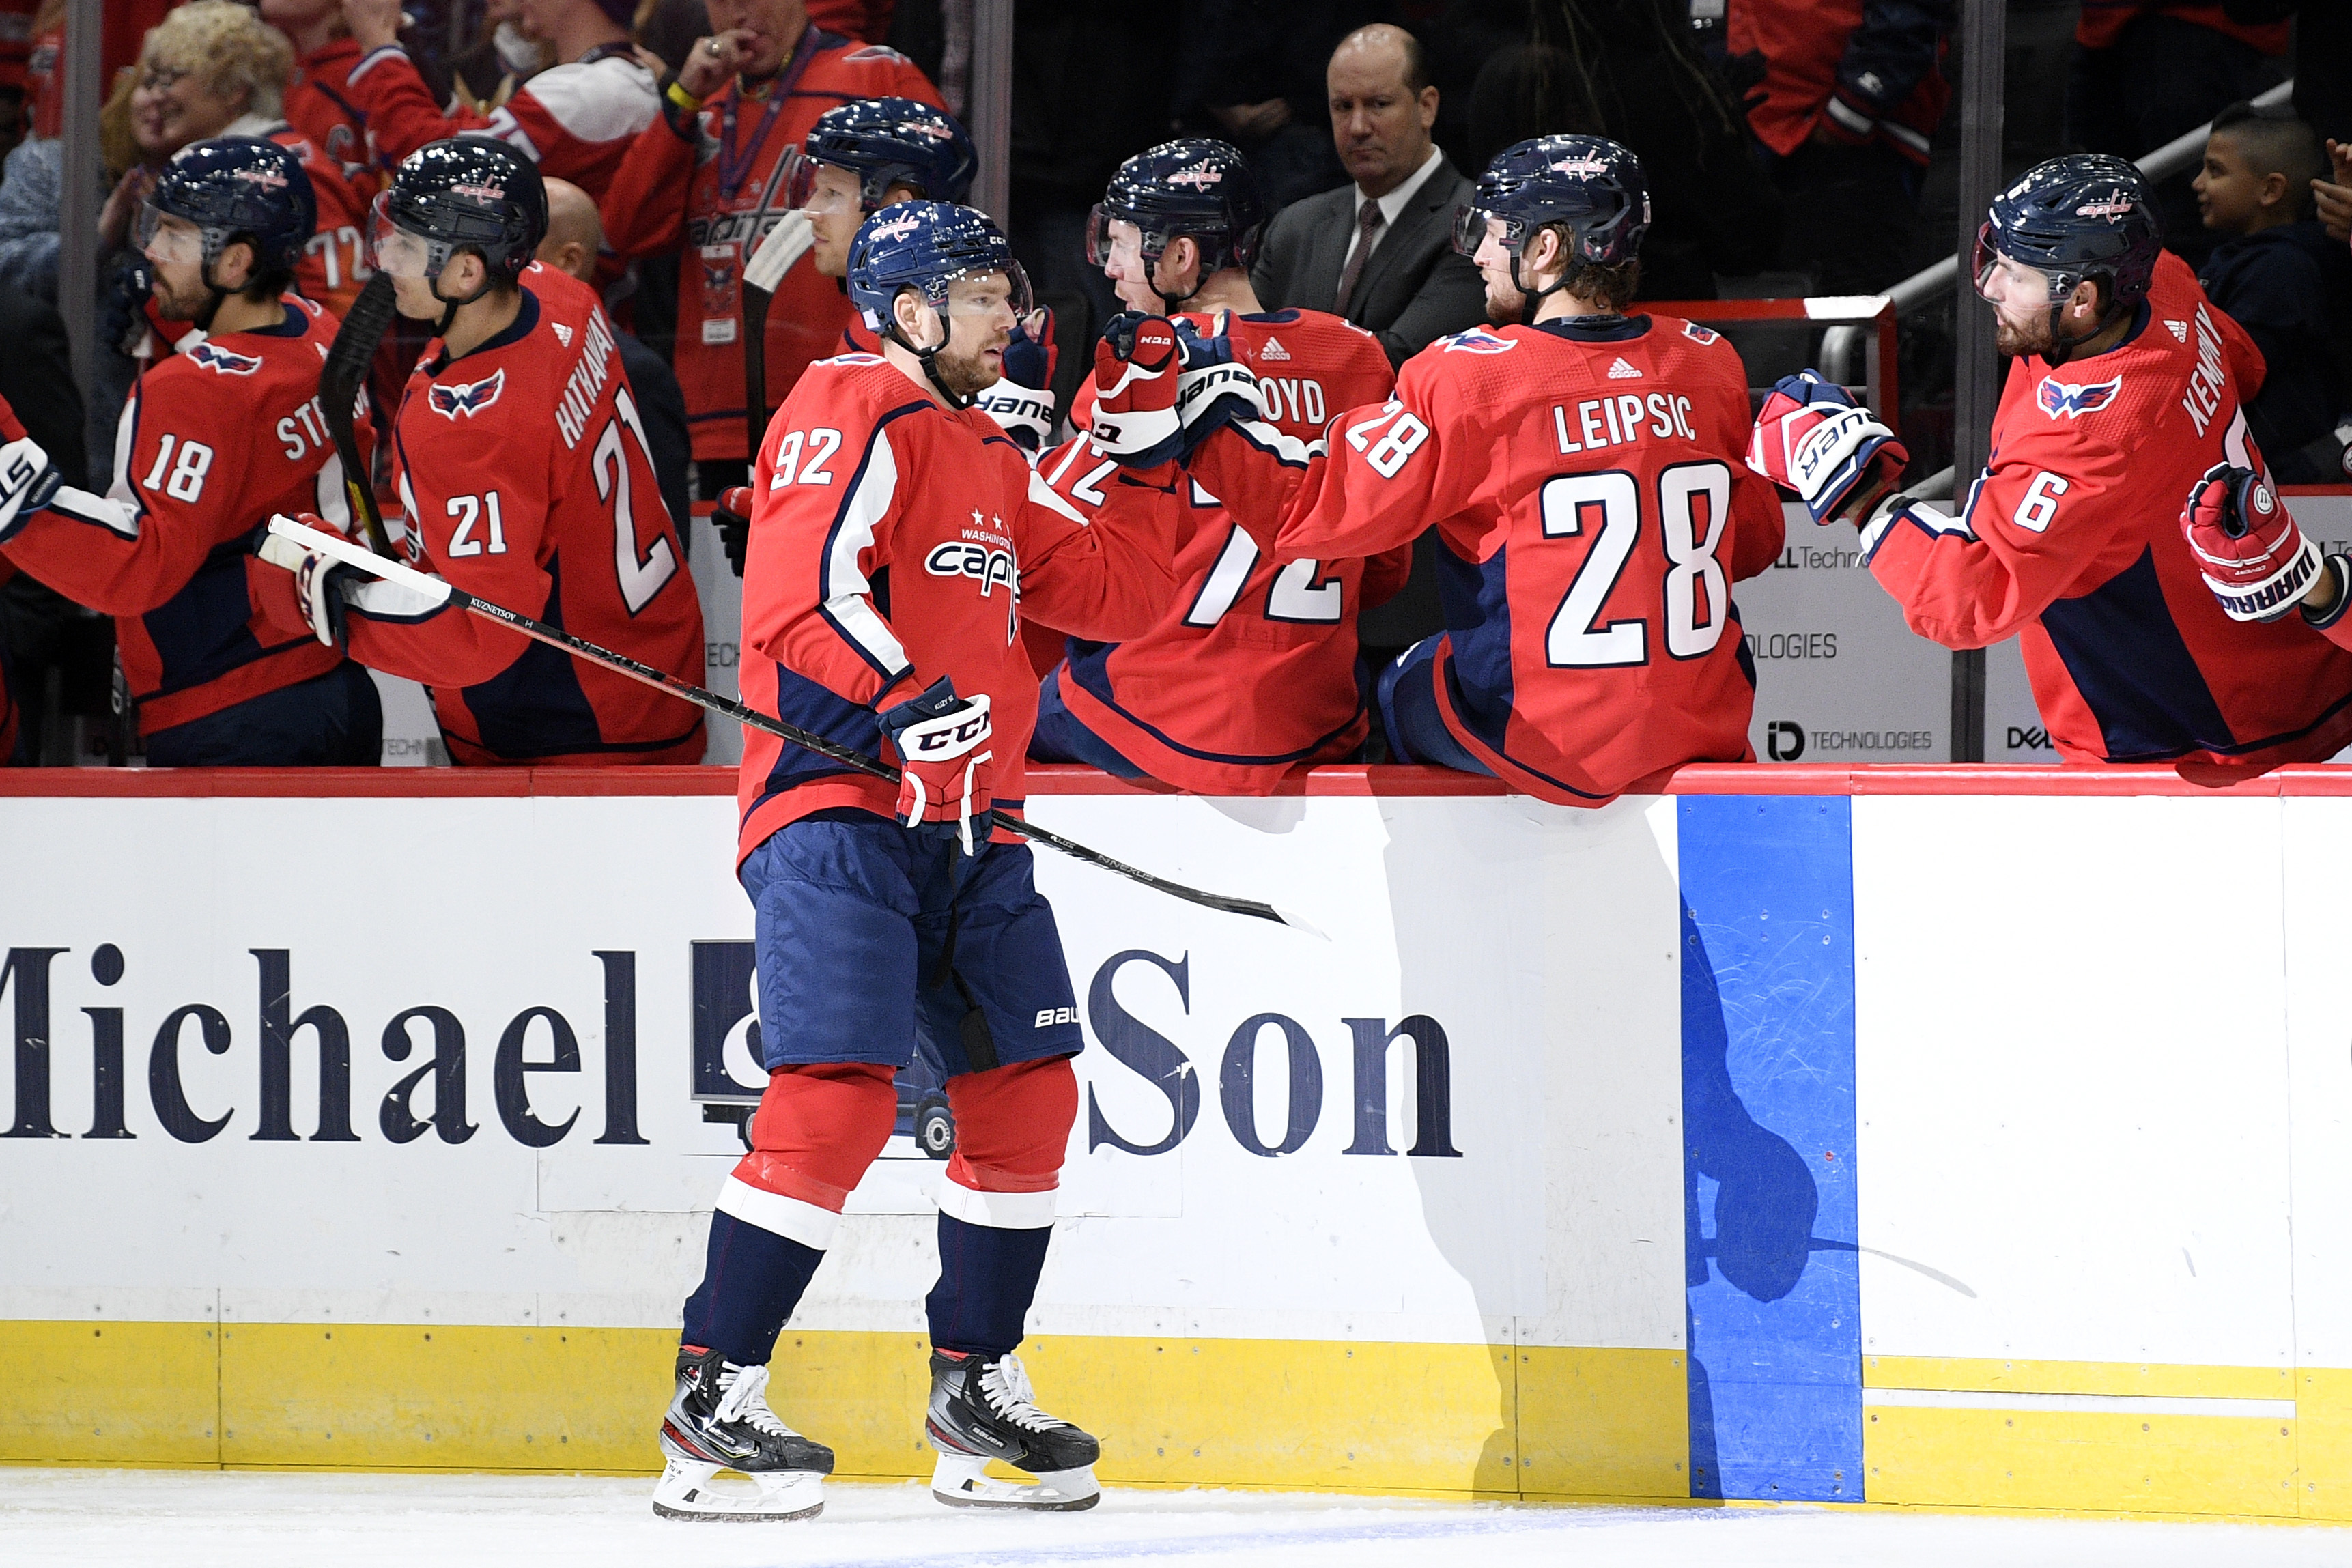 NHL-leading Capitals beat Knights for 6th consecutive win